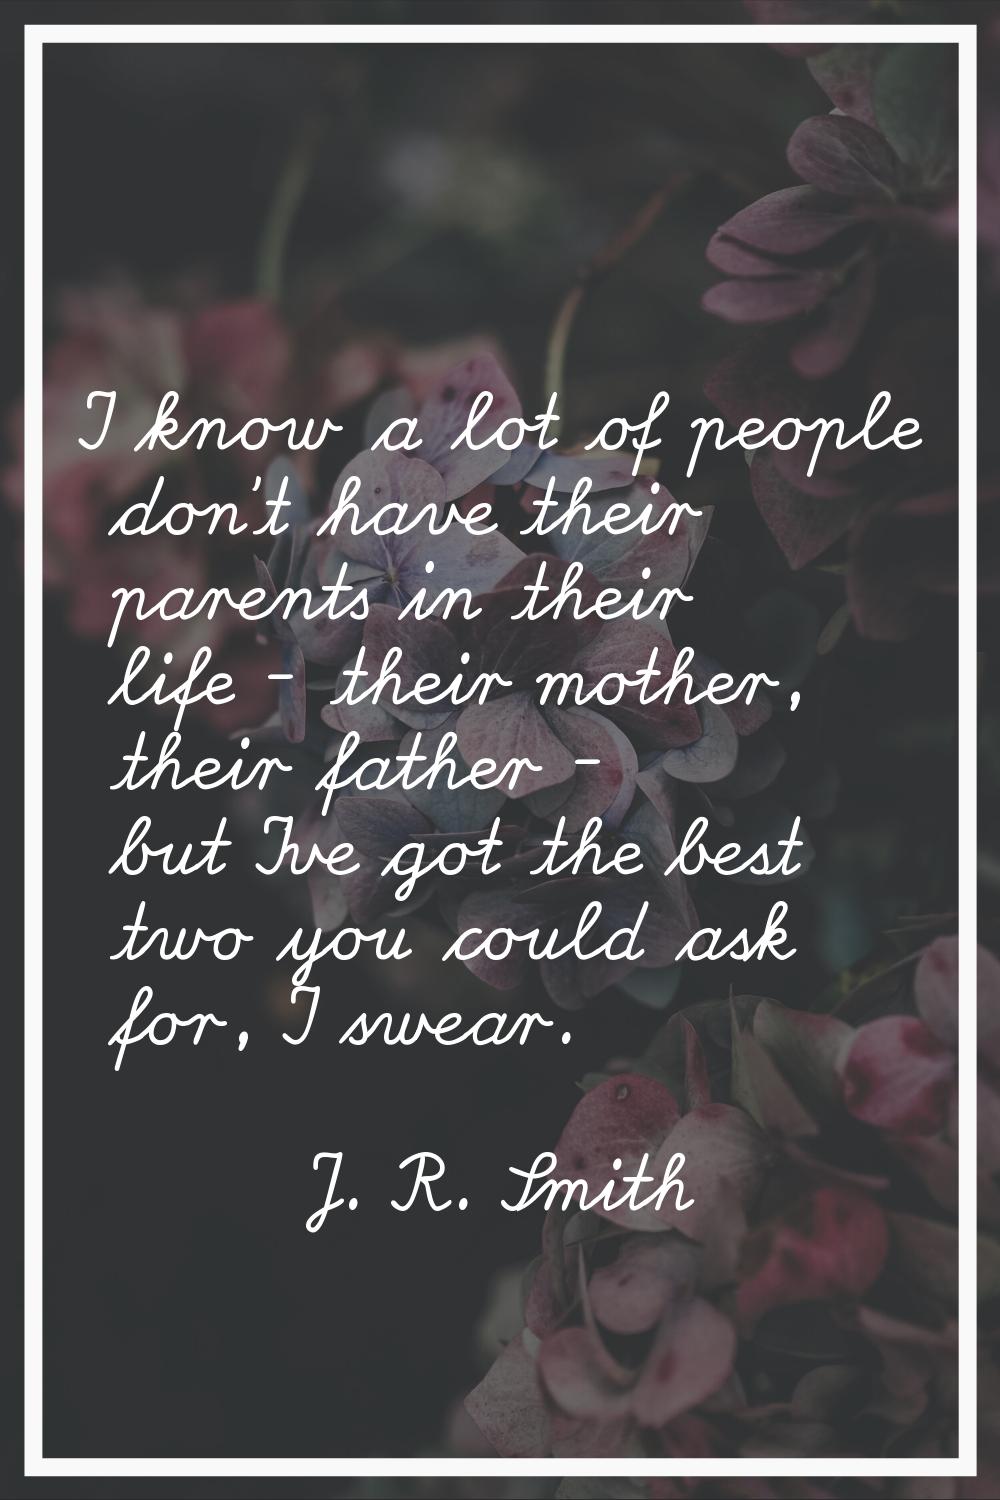 I know a lot of people don't have their parents in their life - their mother, their father - but I'